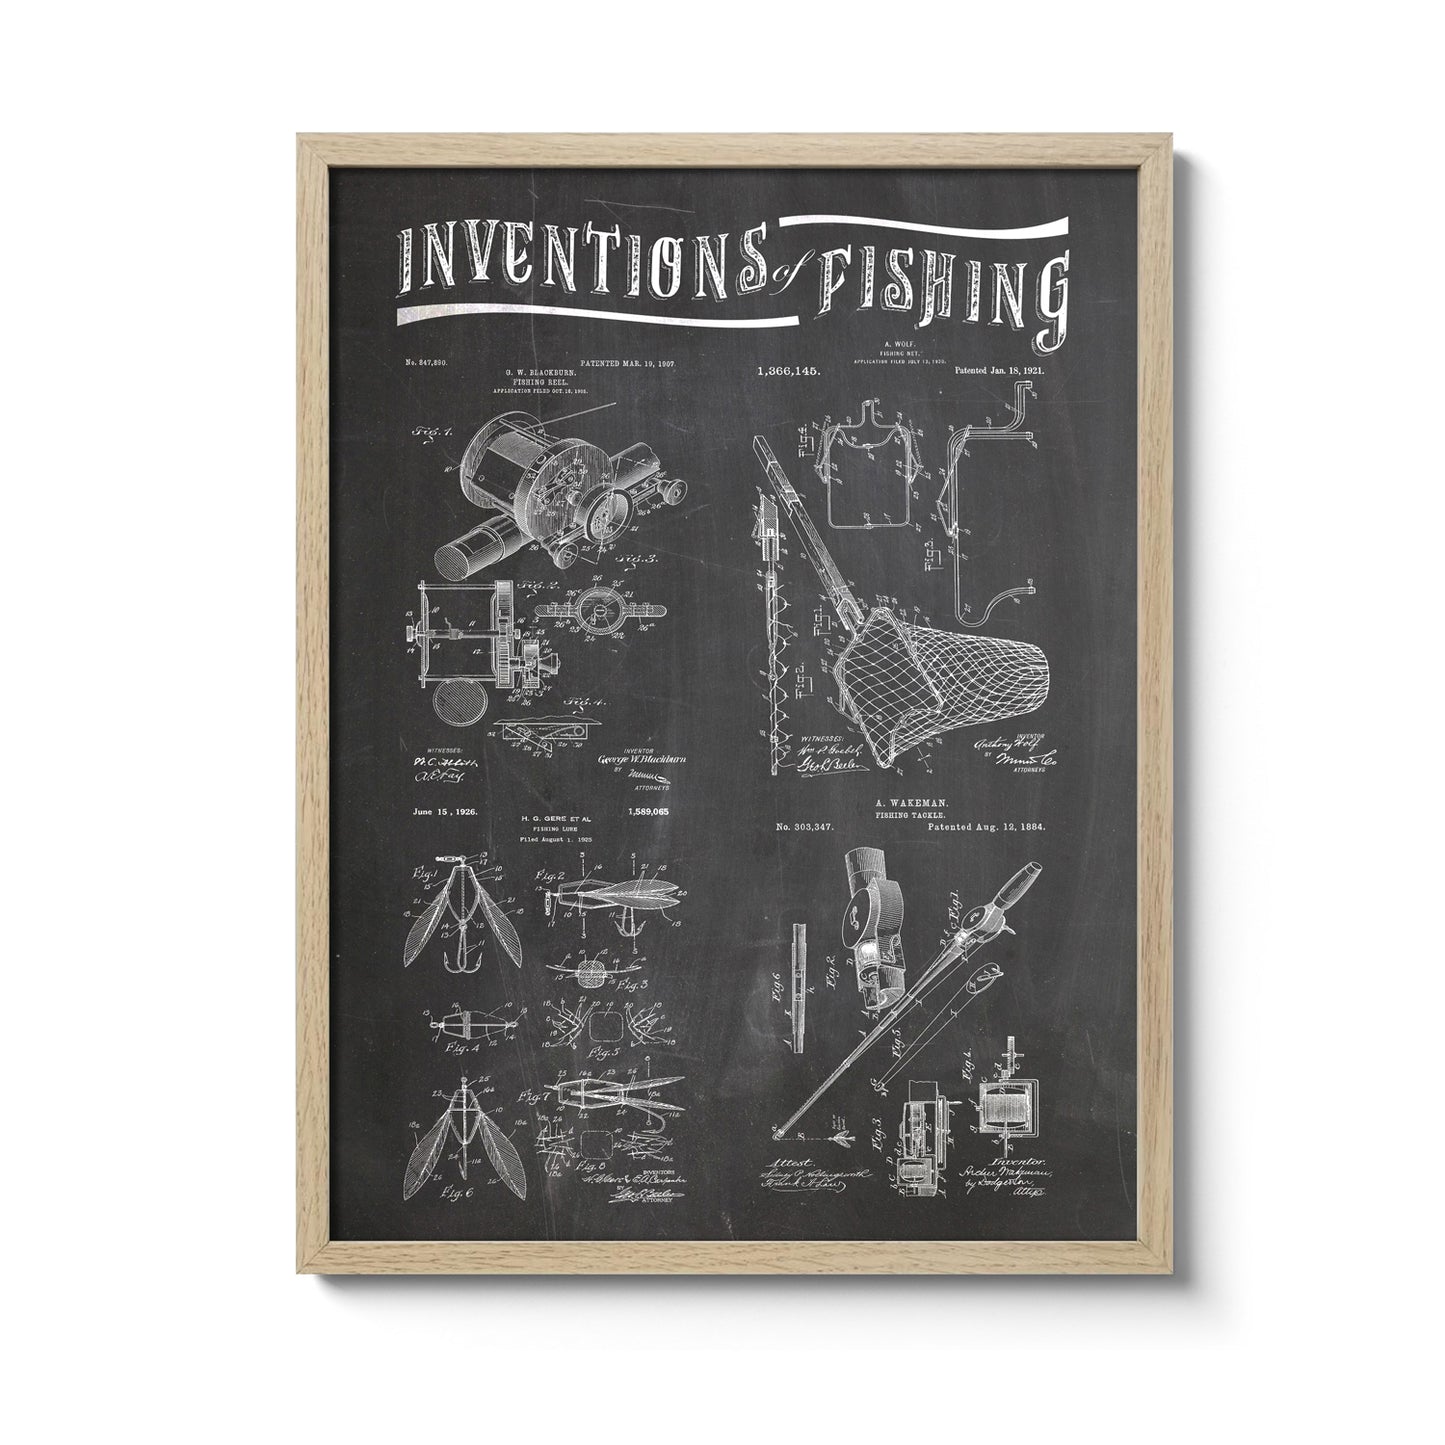 Affiche Inventions Pêche